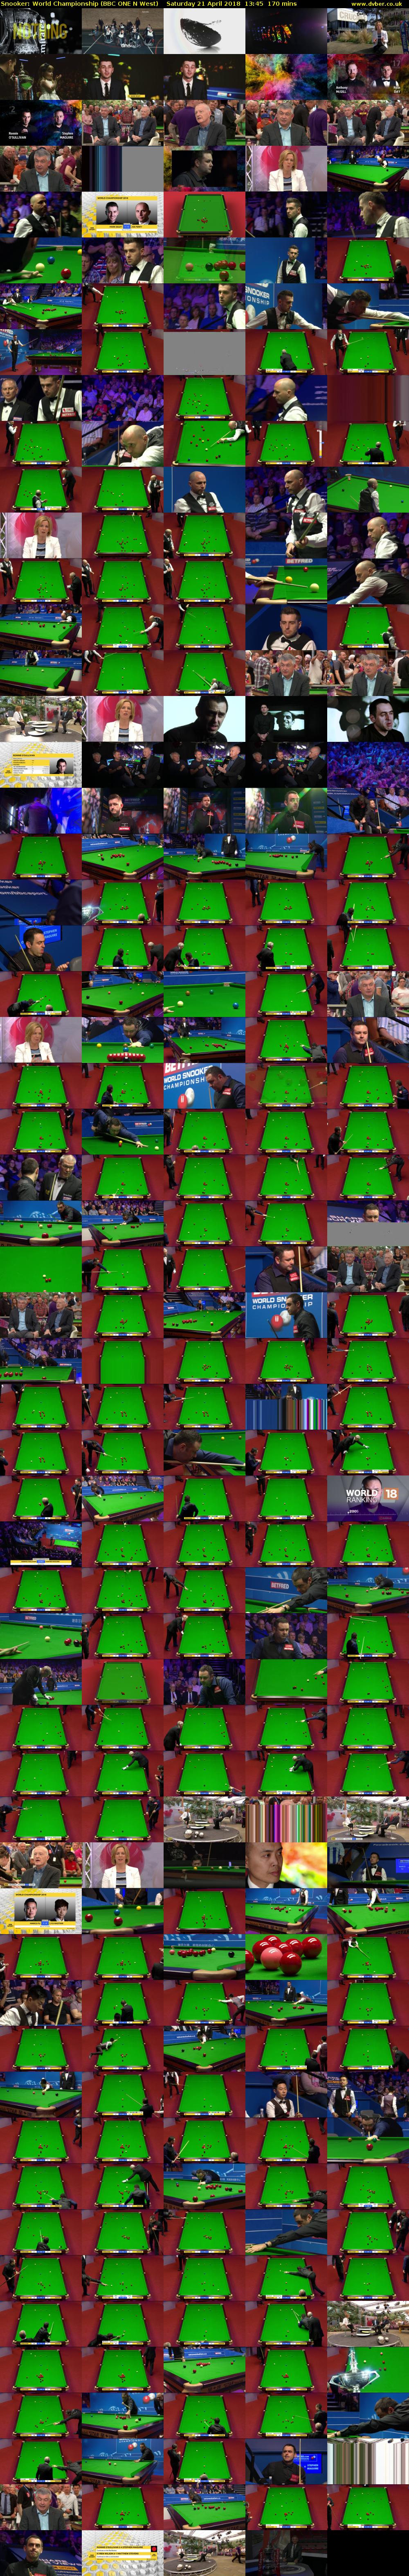 Snooker: World Championship (BBC ONE N West) Saturday 21 April 2018 13:45 - 16:35